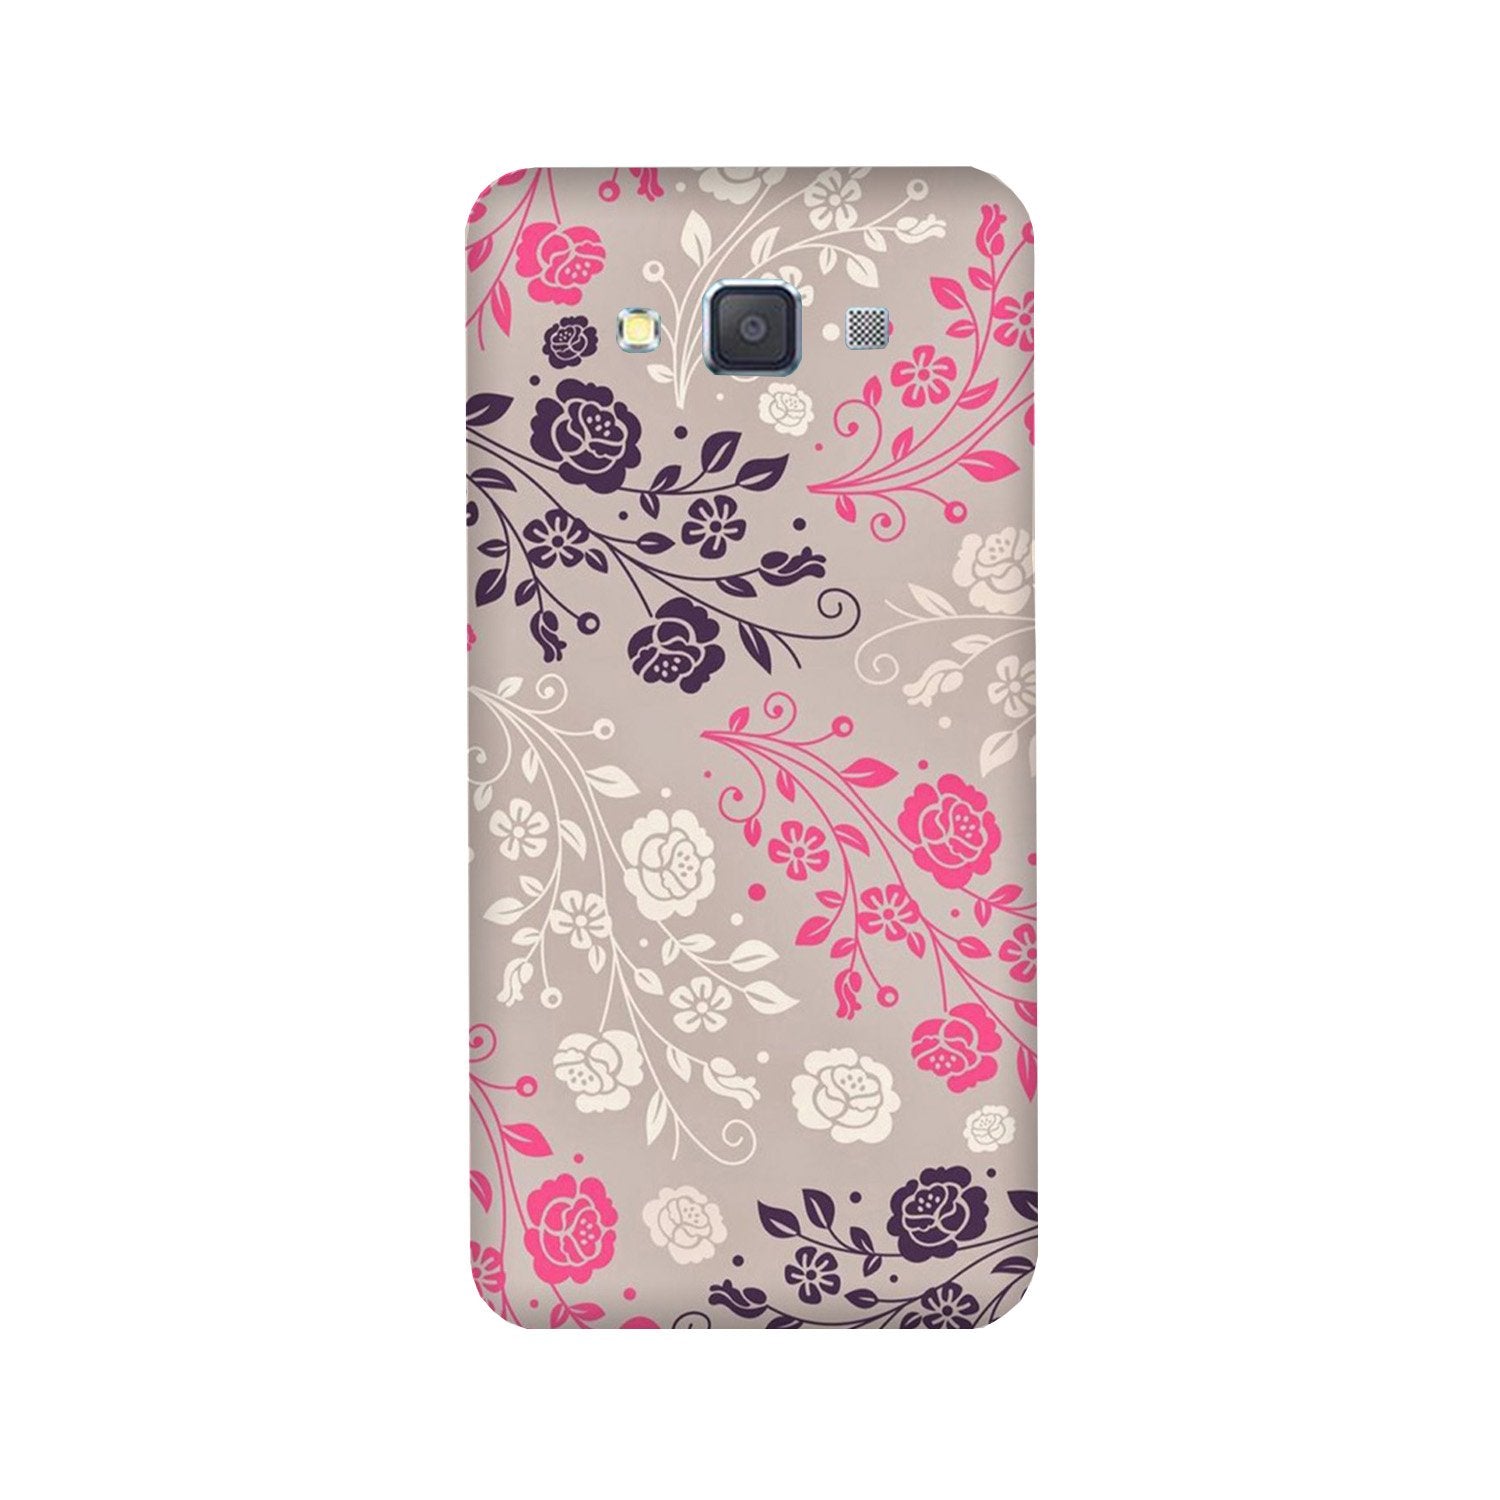 Pattern2 Case for Galaxy A3 (2015)